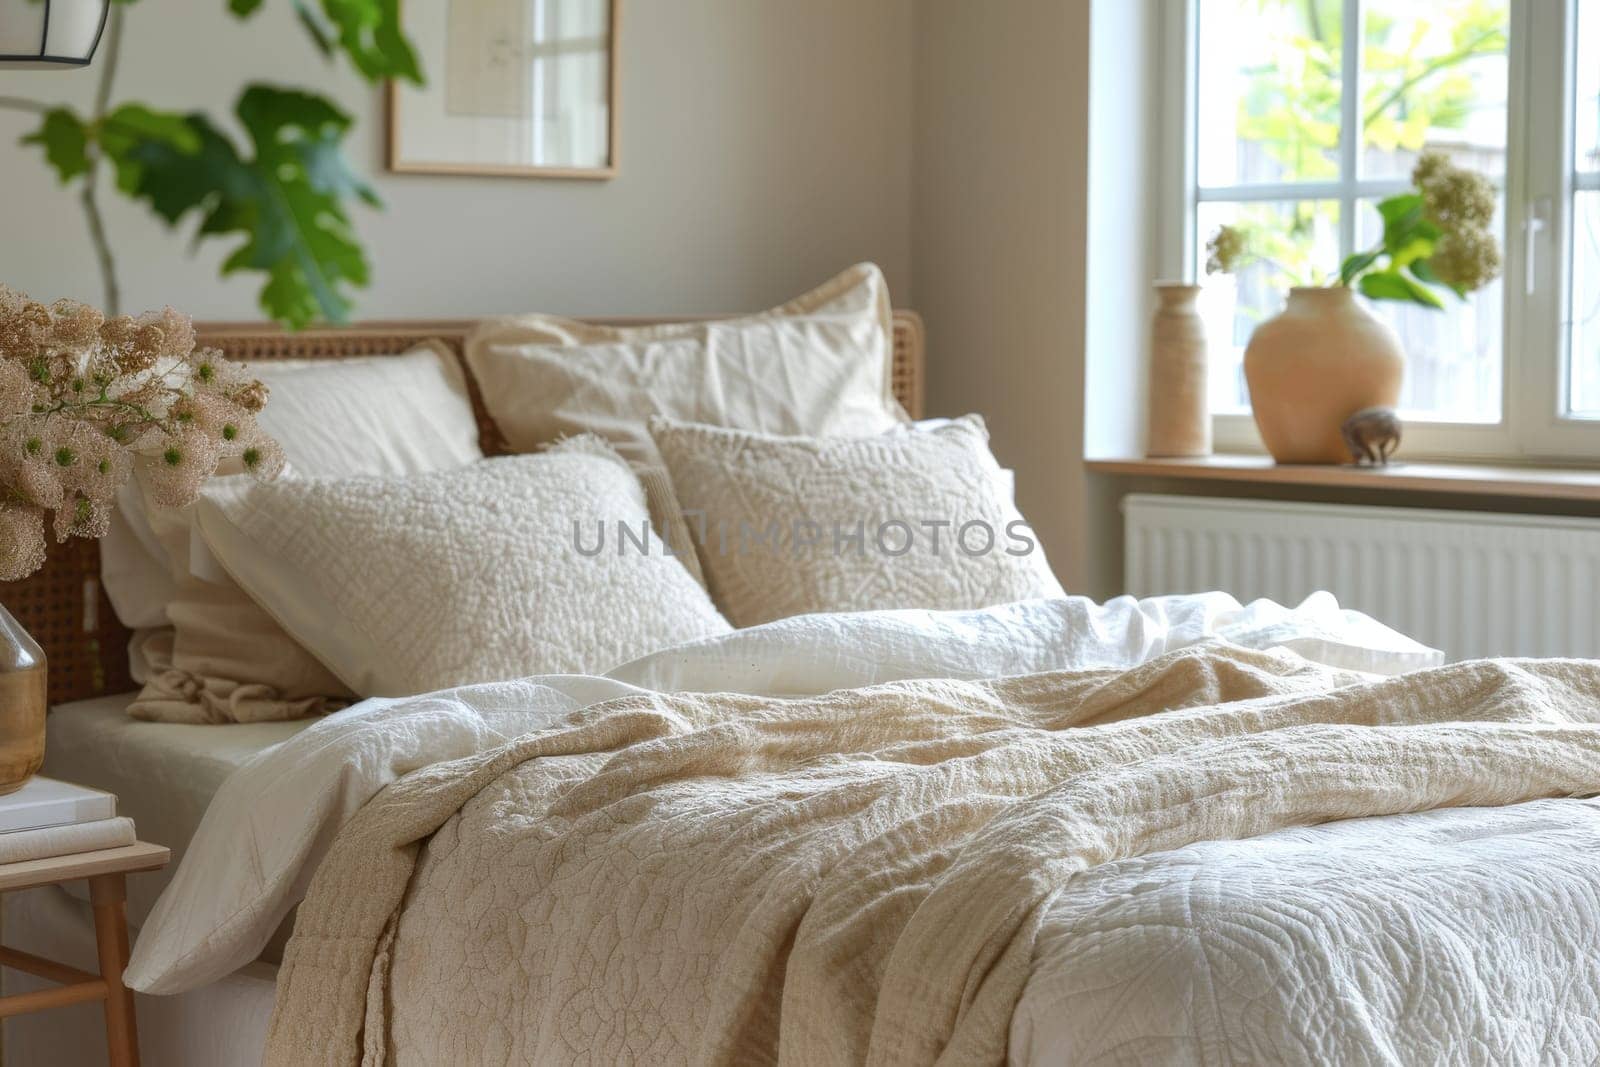 A bed with a white comforter and pillows, and a vase of flowers on a nightstand by itchaznong